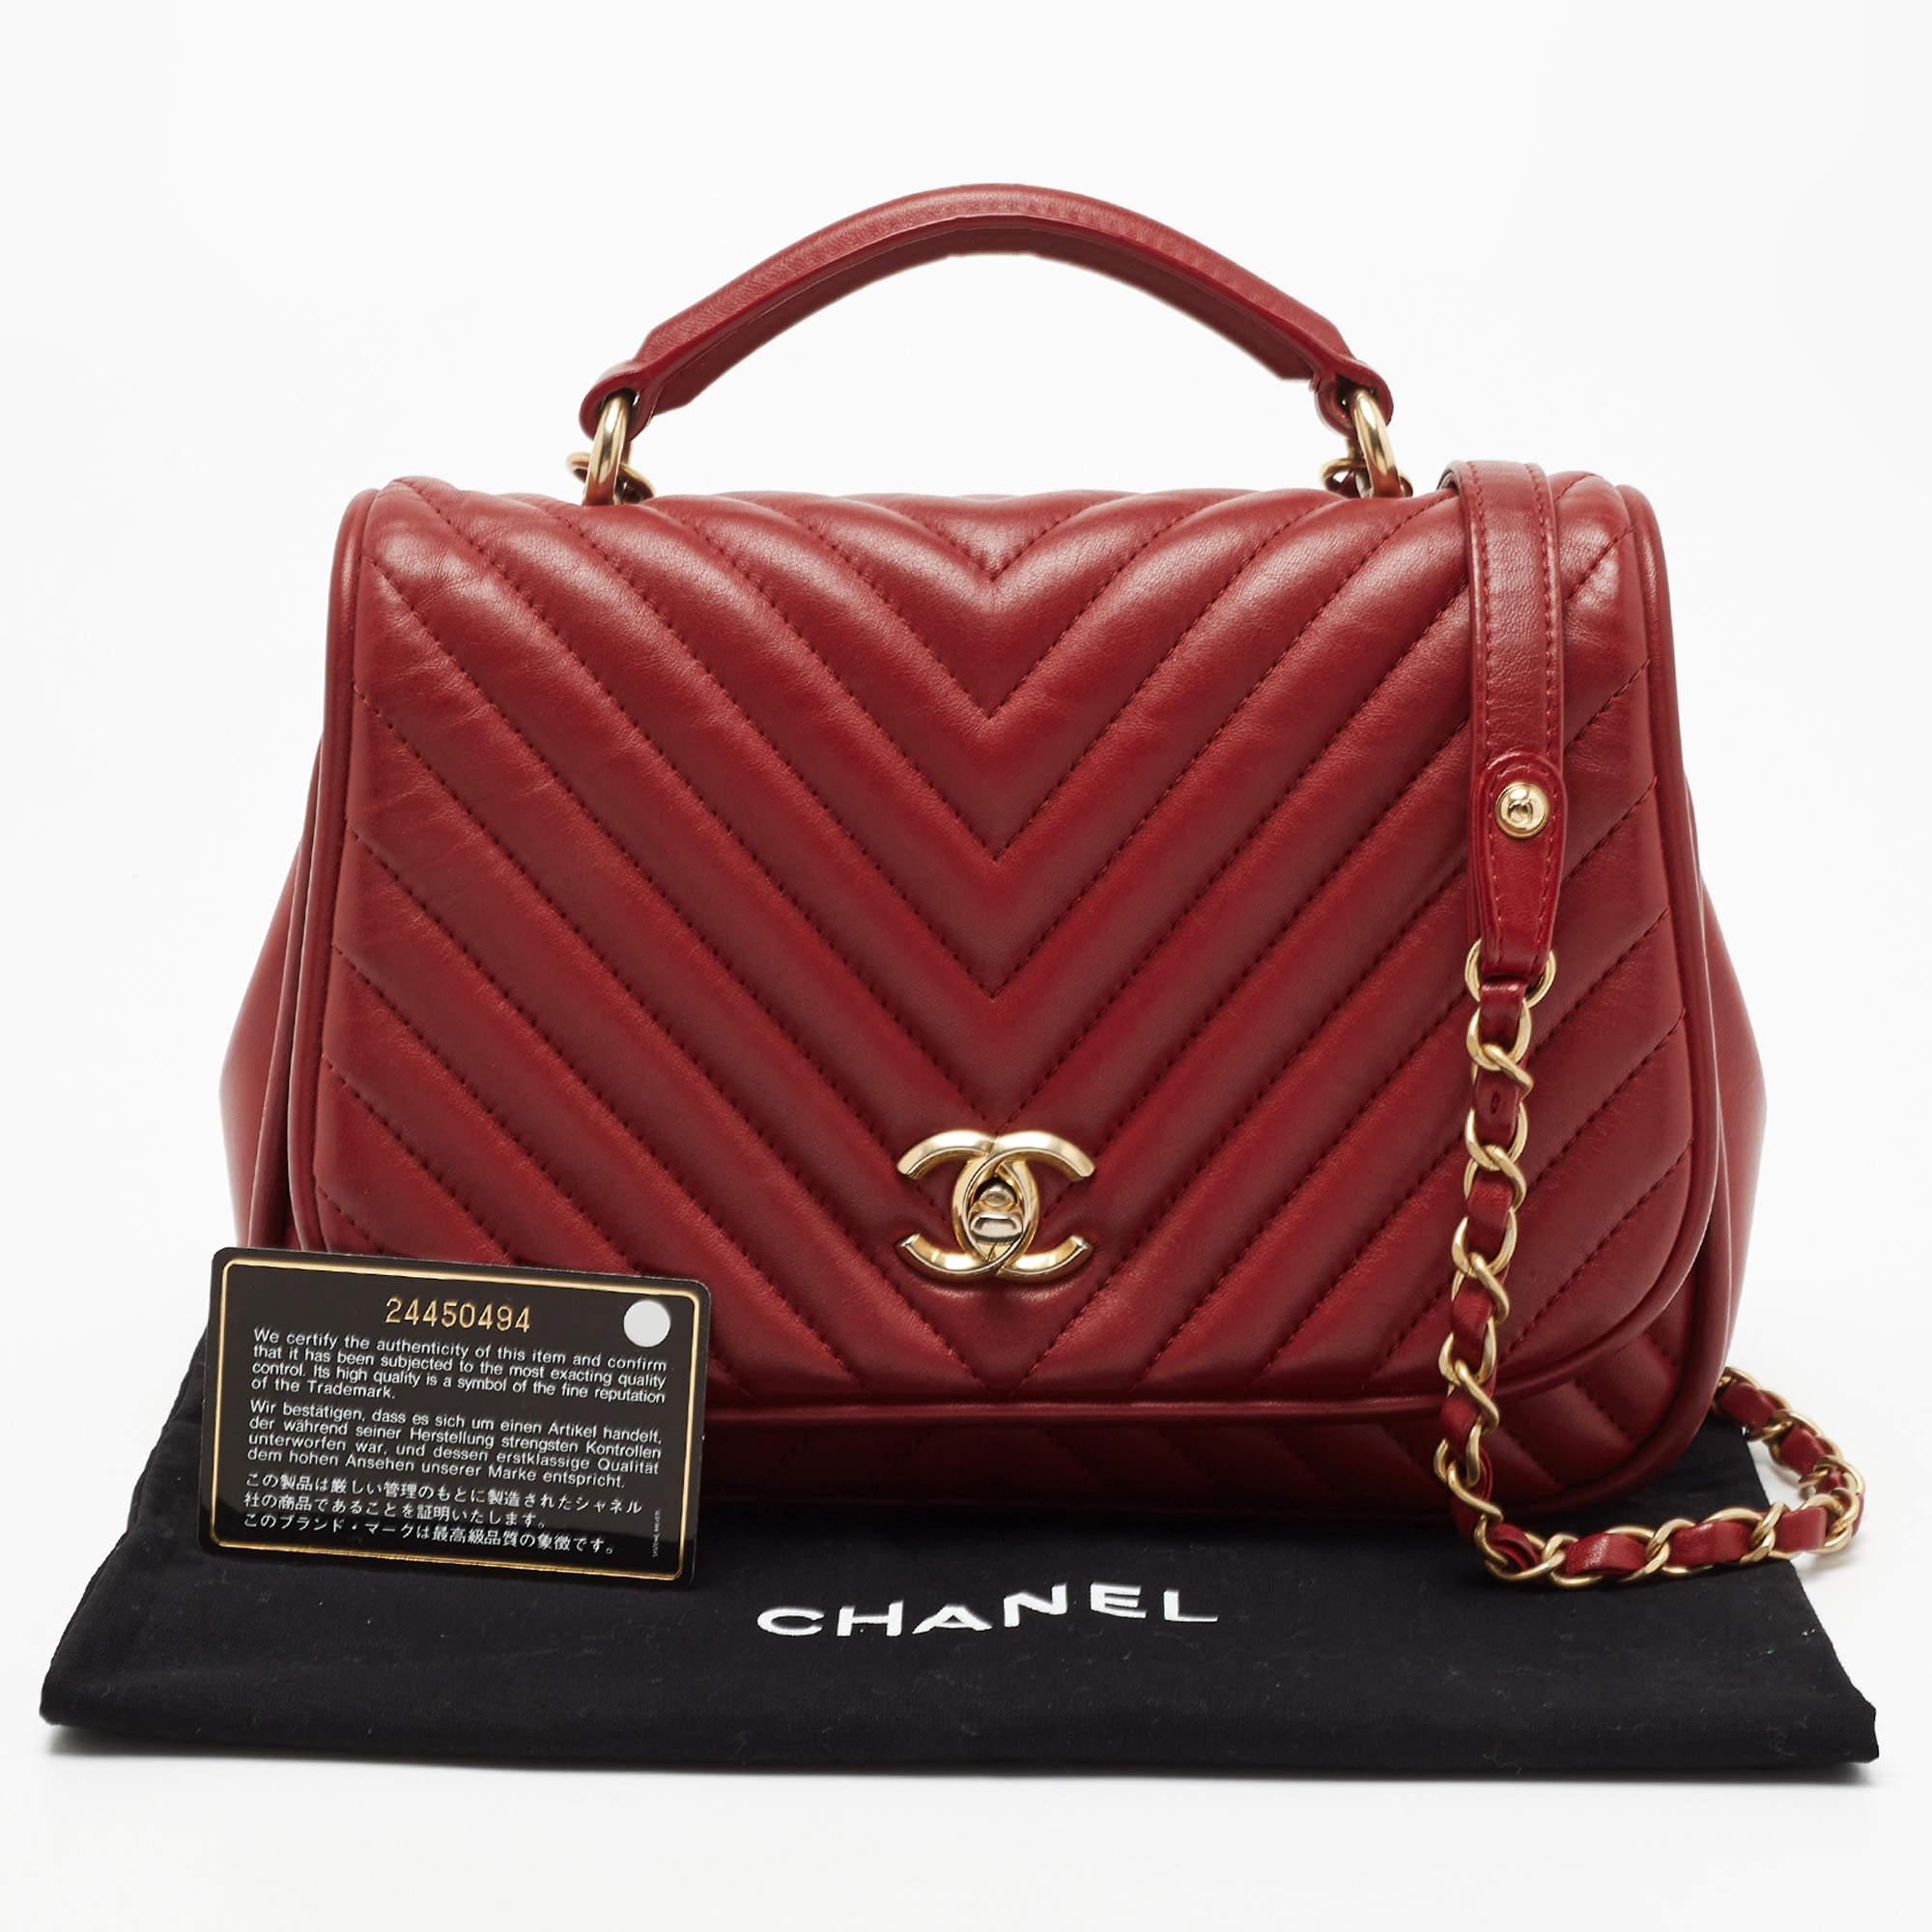 Chanel Red Chevron Leather CC Flap Top Handle Bag 8